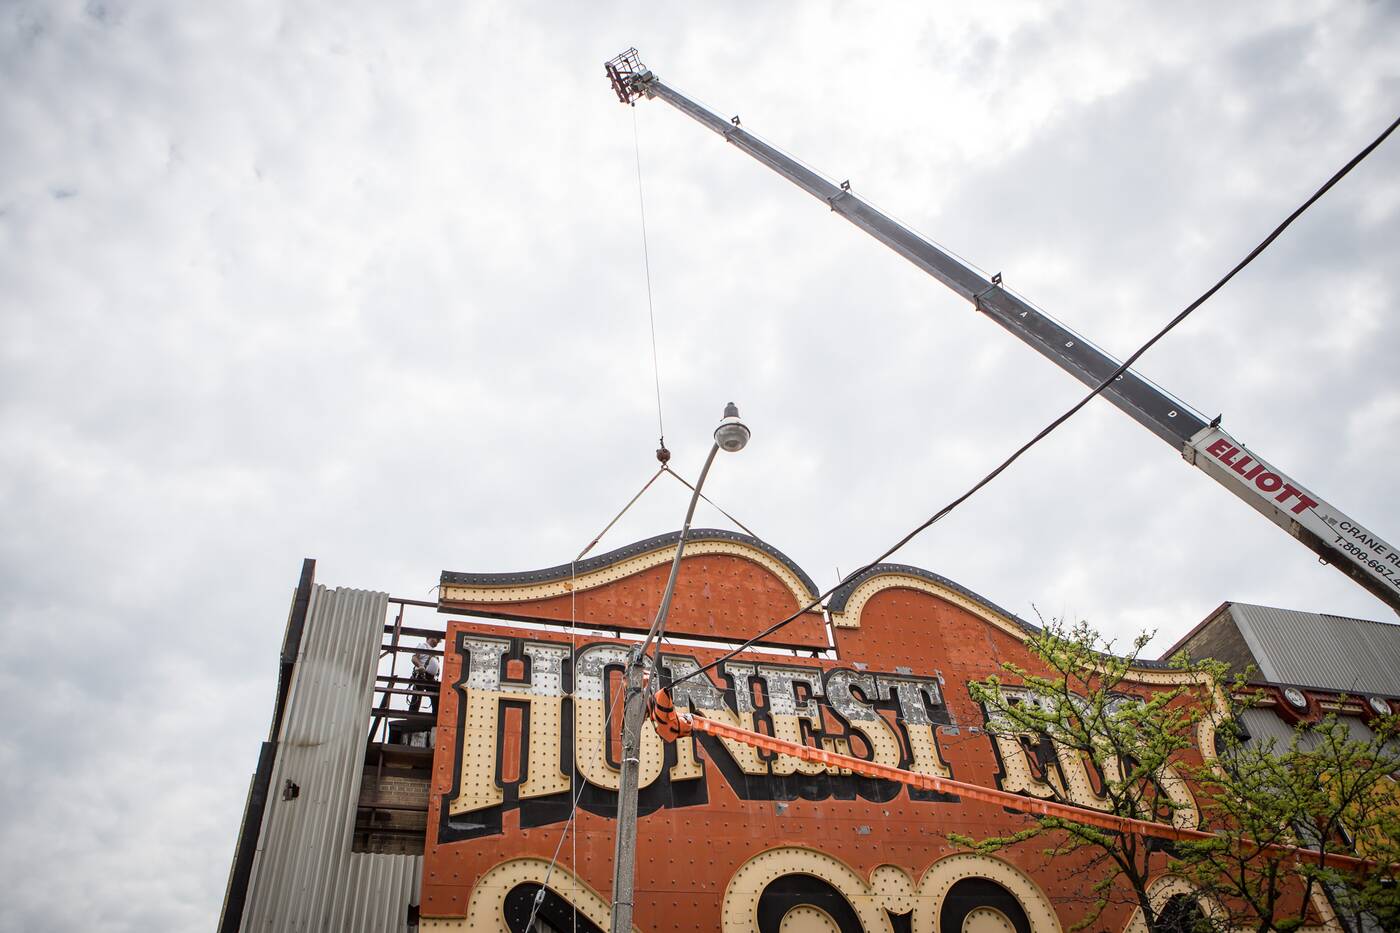 honest eds sign removal